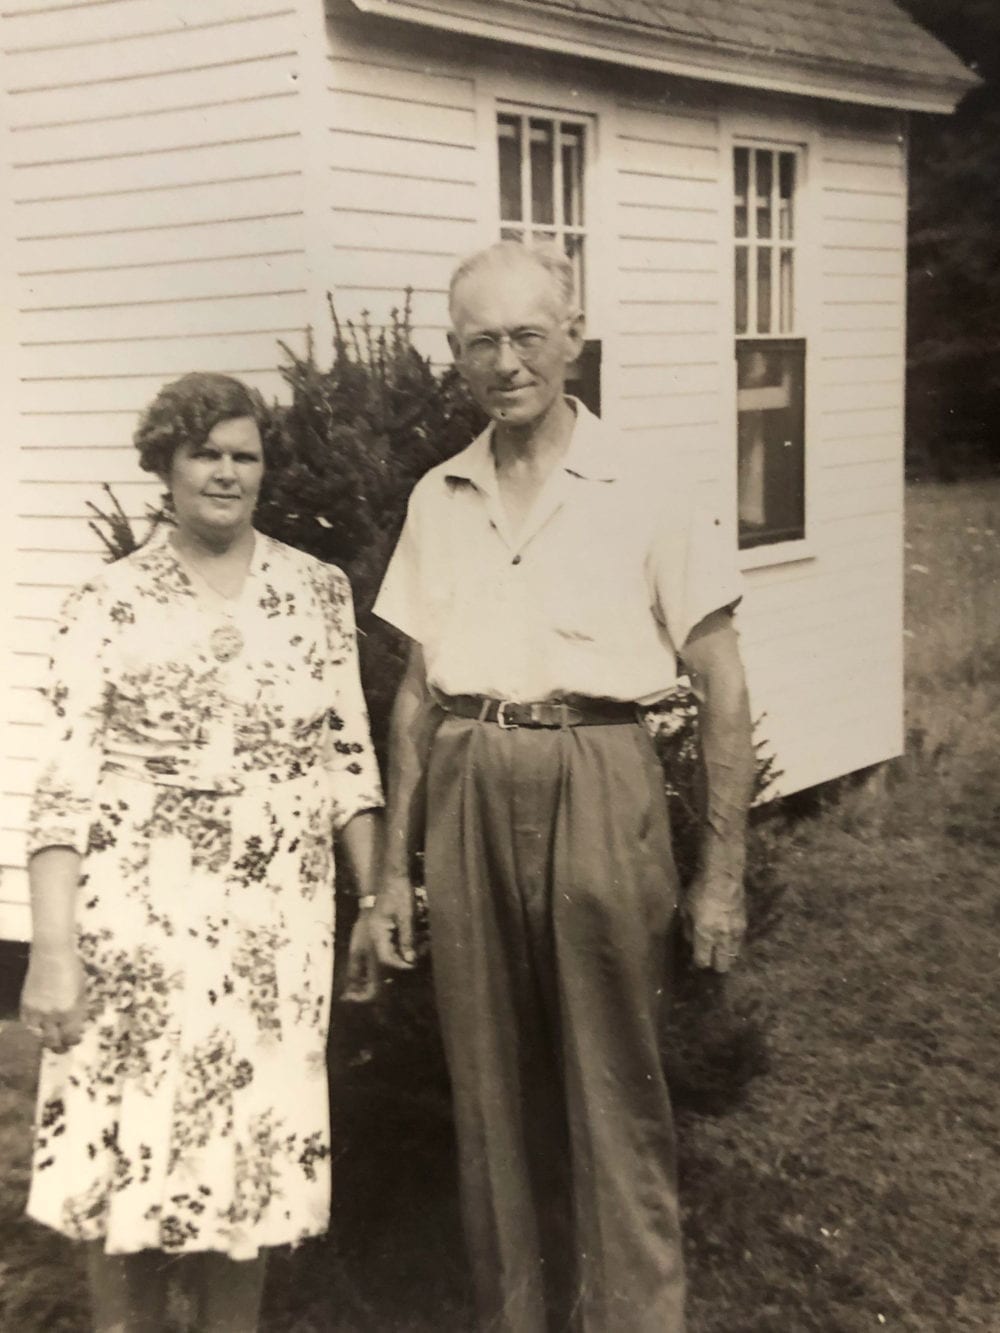 Miriam and Herbert Plimpton in front of New England Village